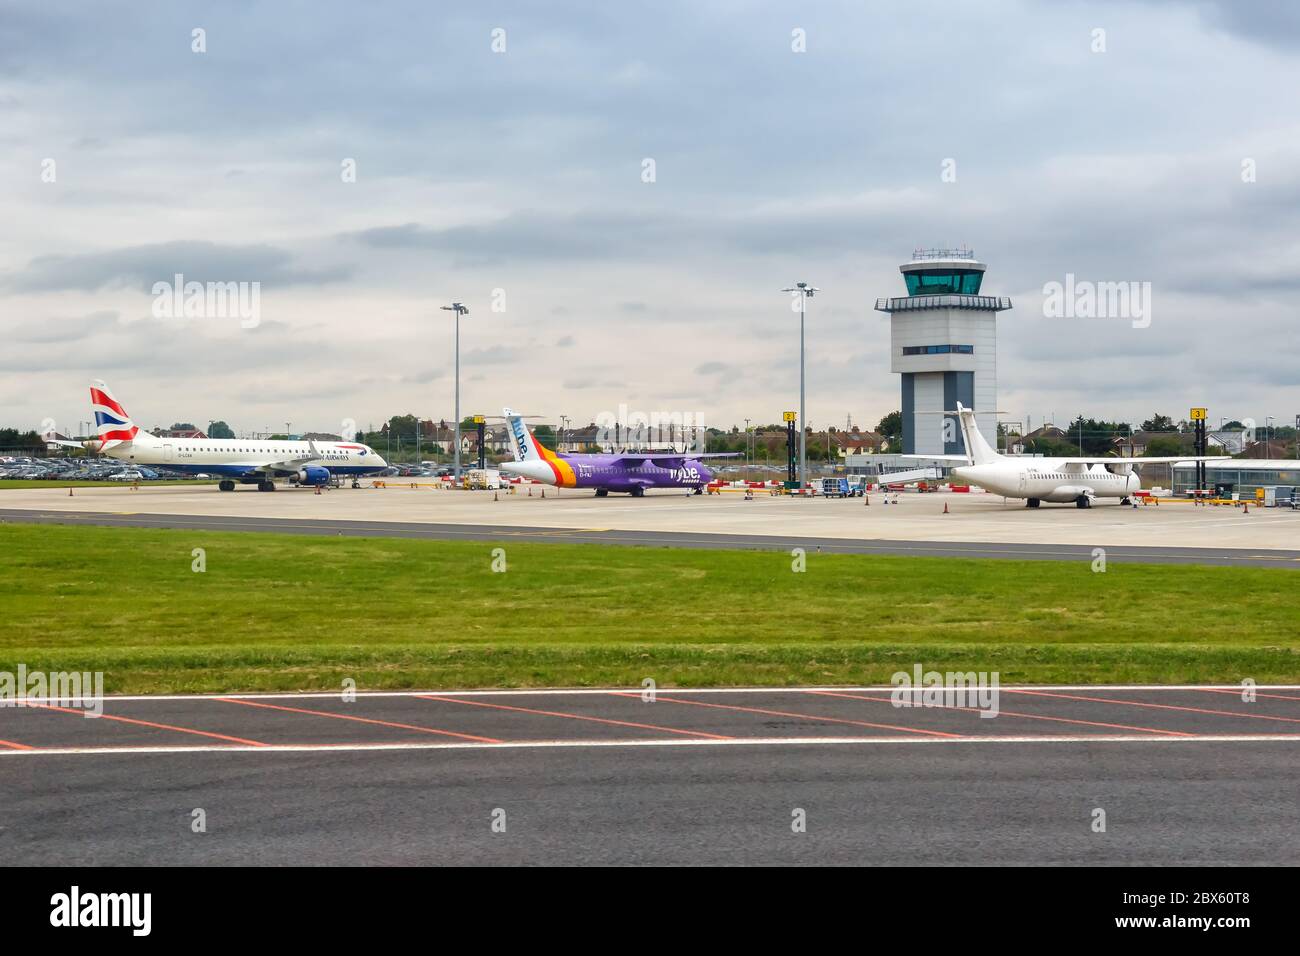 Southend, United Kingdom July 6, 2019: Airplanes at London Southend airport SEN in the United Kingdom. Stock Photo